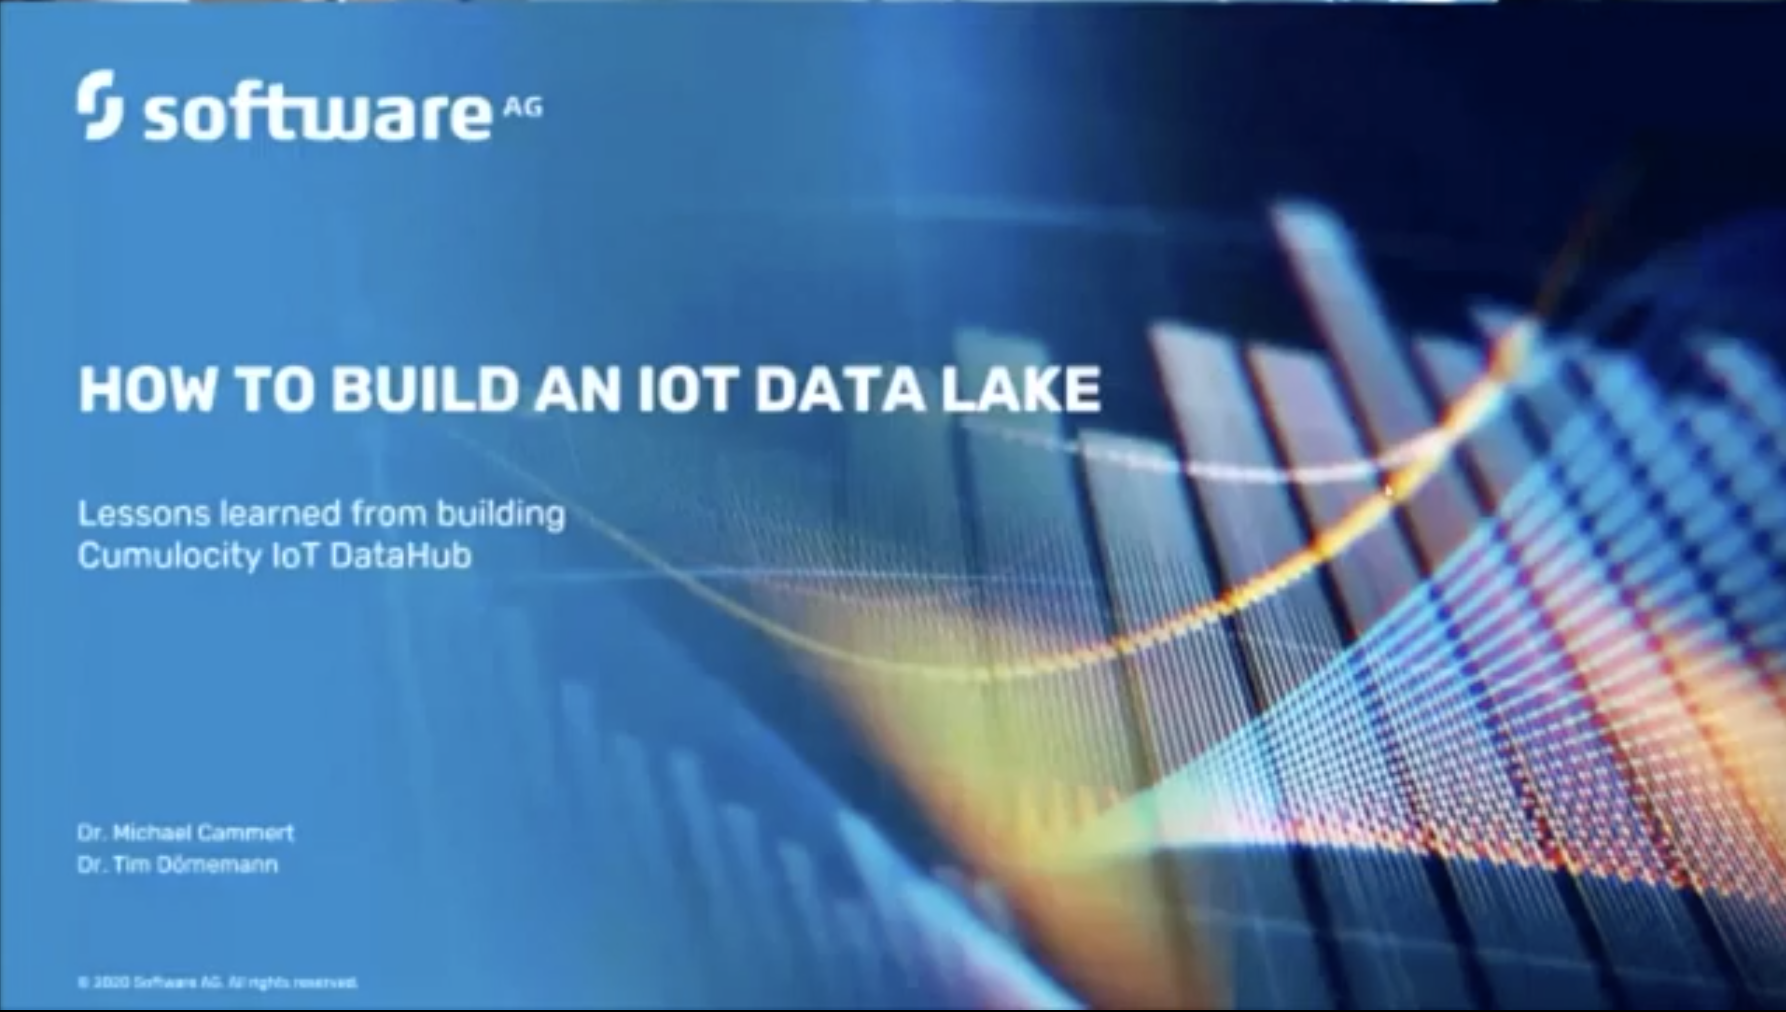 How to Build an IoT Data Lake